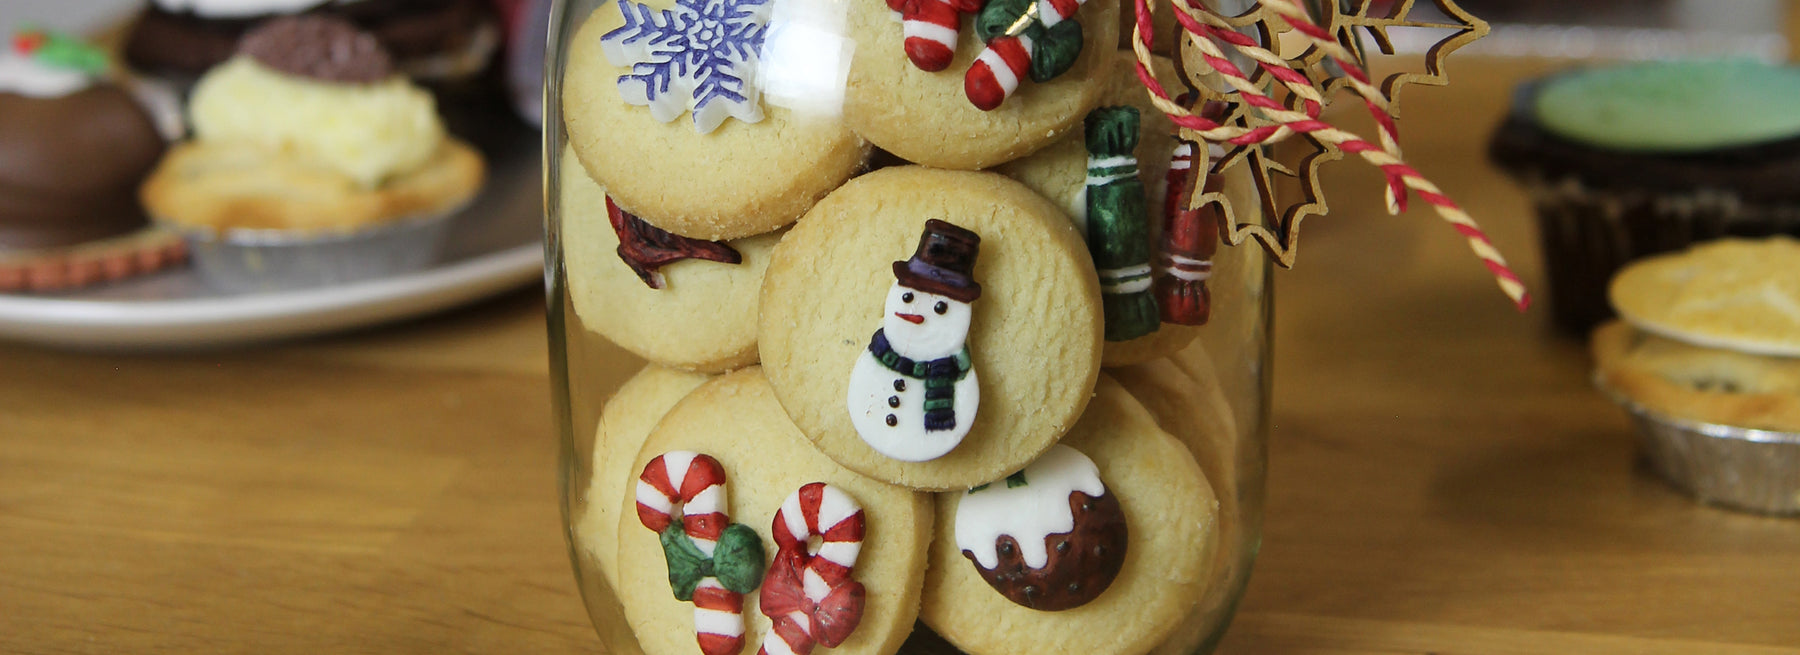 5 Top Tips for Decorating Christmas Treats